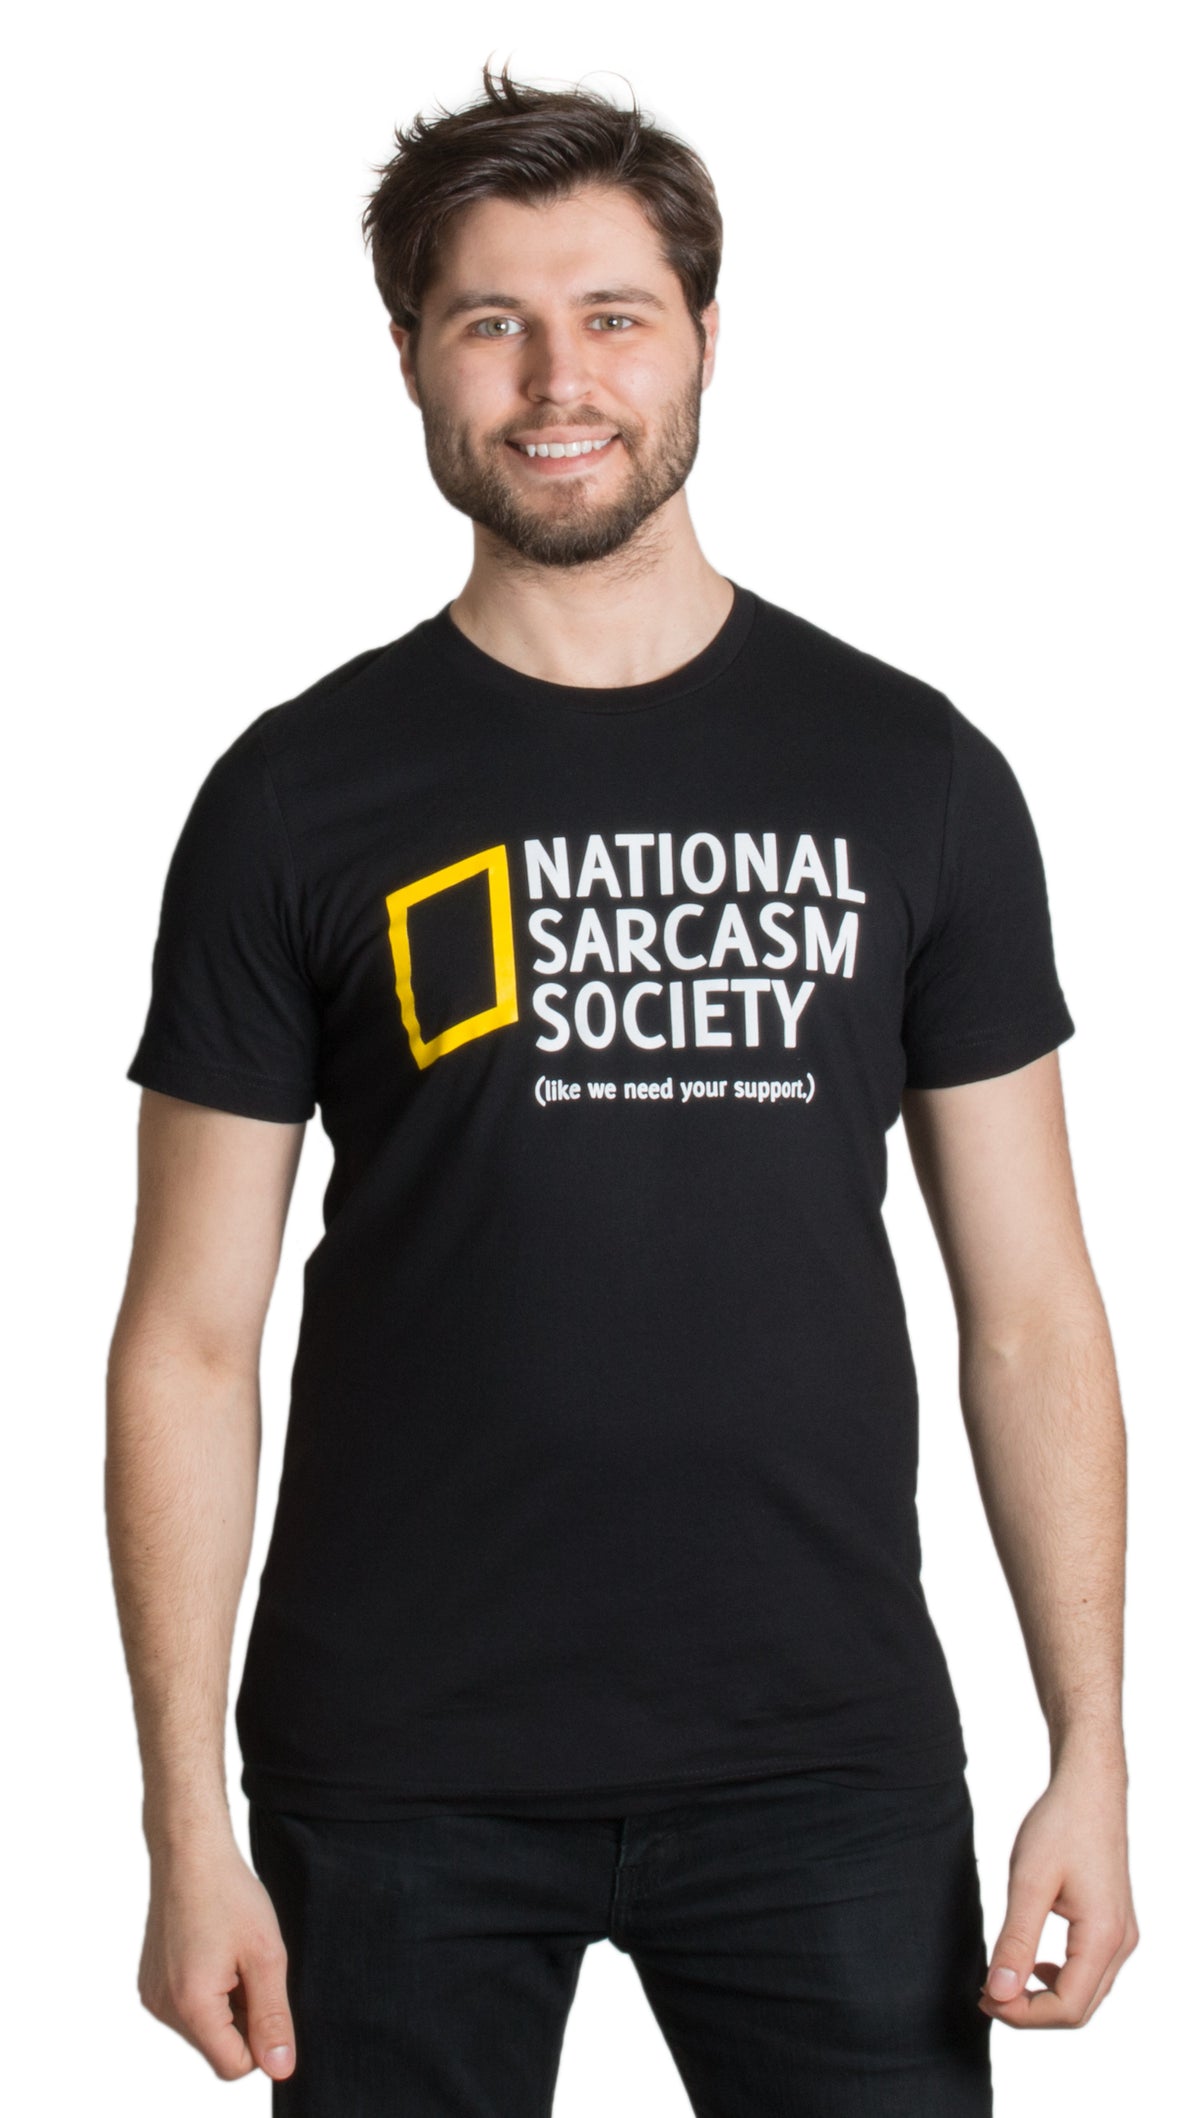 National Sarcasm Society (like we need your support) | Funny Sarcastic T-shirt